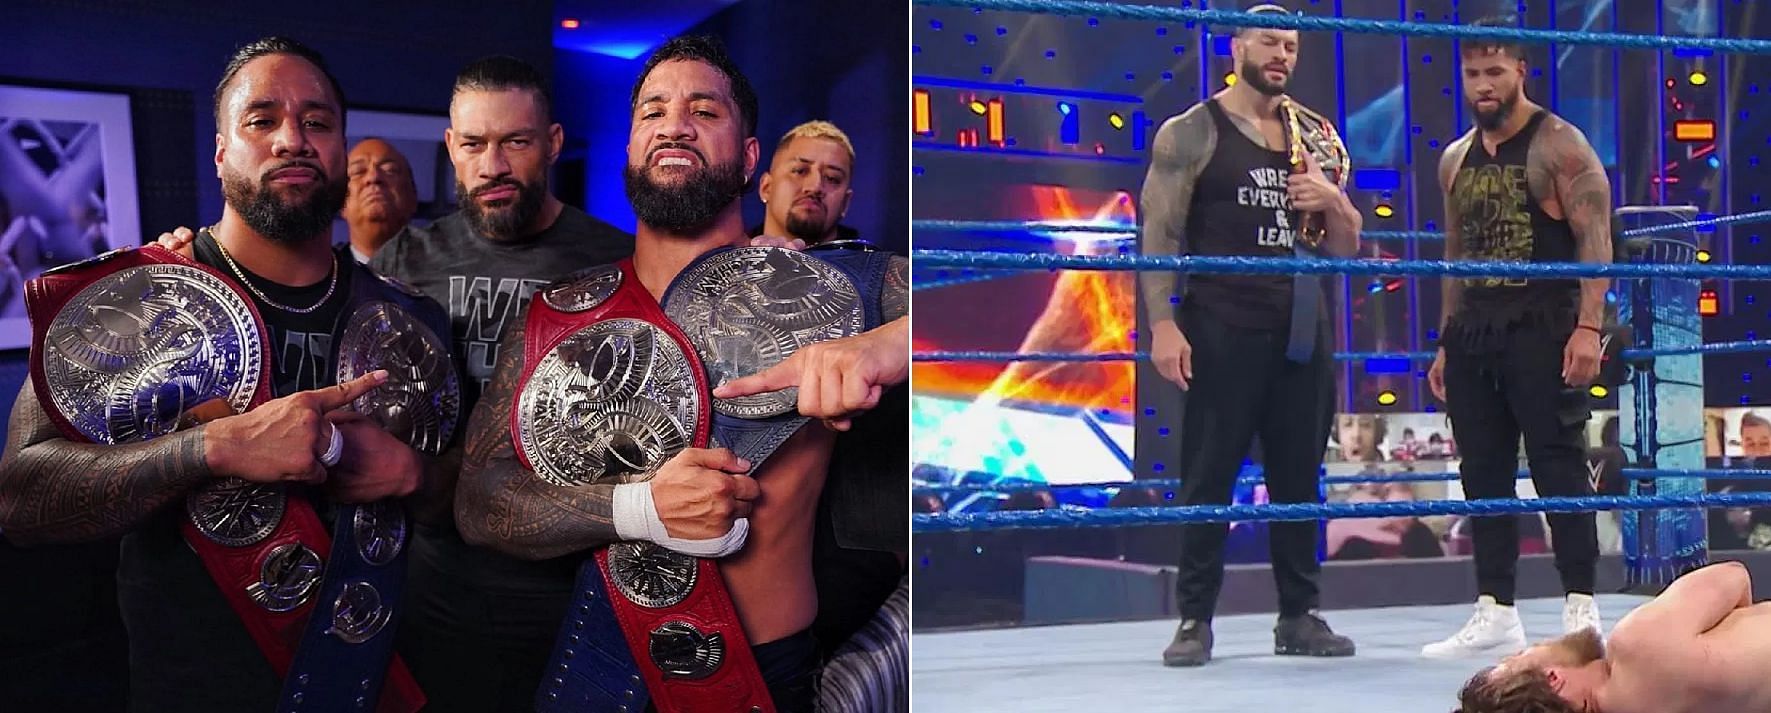 Roman Reigns could be ready to recruit to The Bloodline